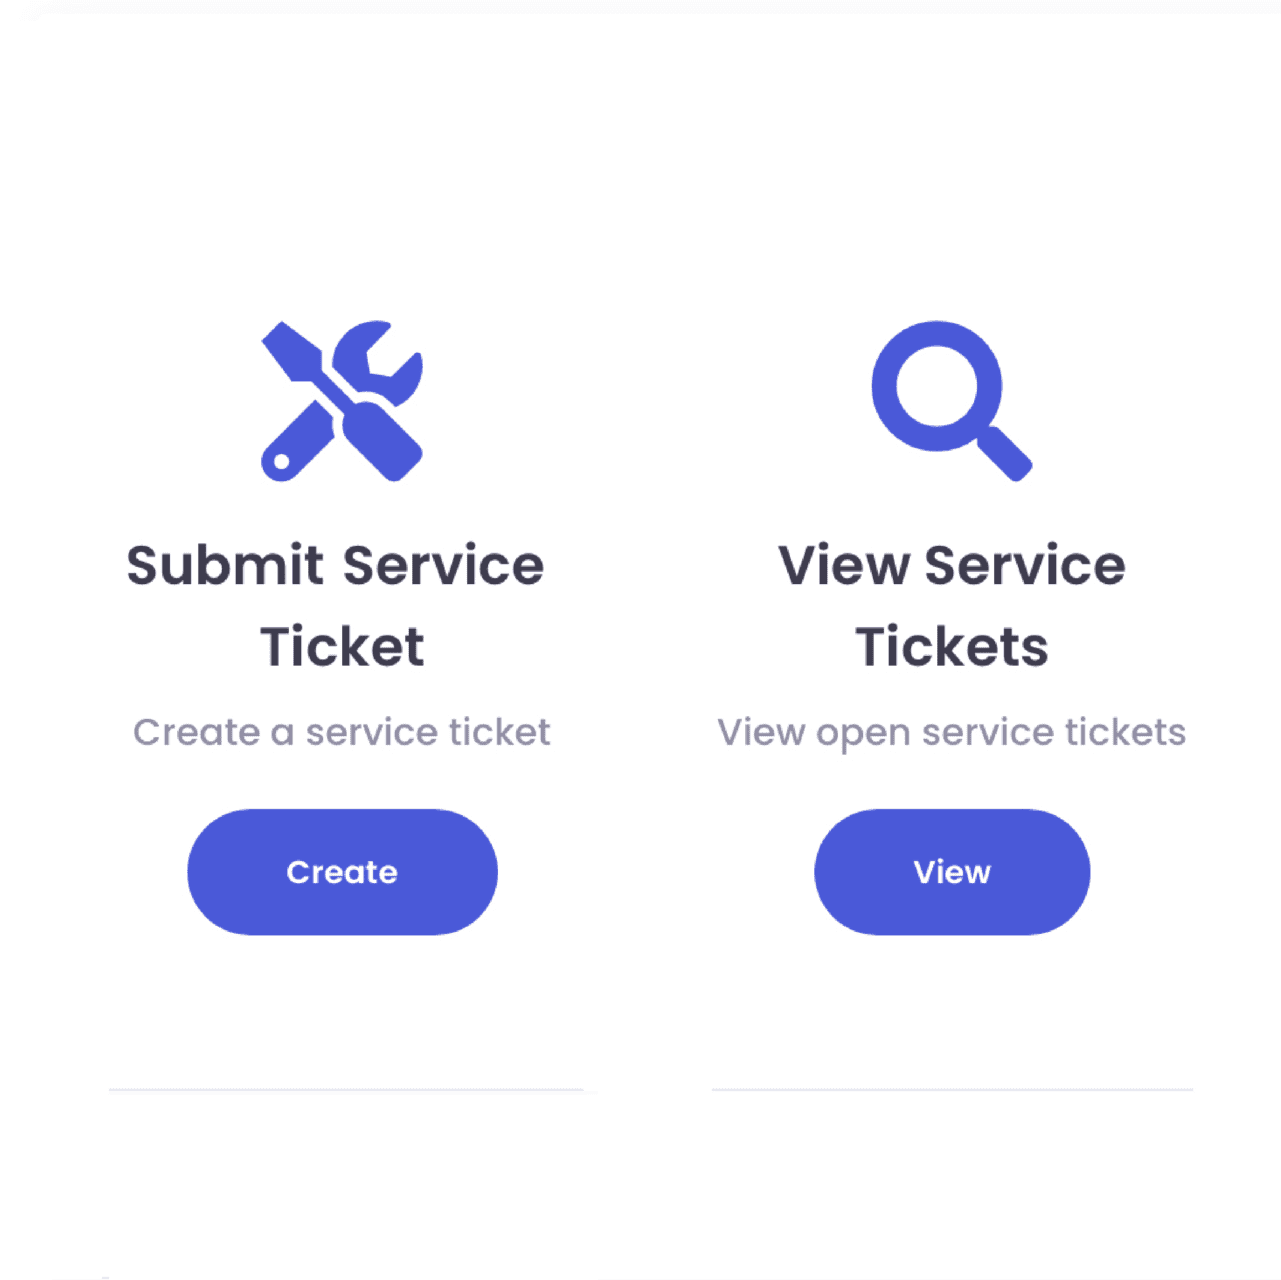 Buttons for "Submit Service Ticket" and "View Service Tickets"